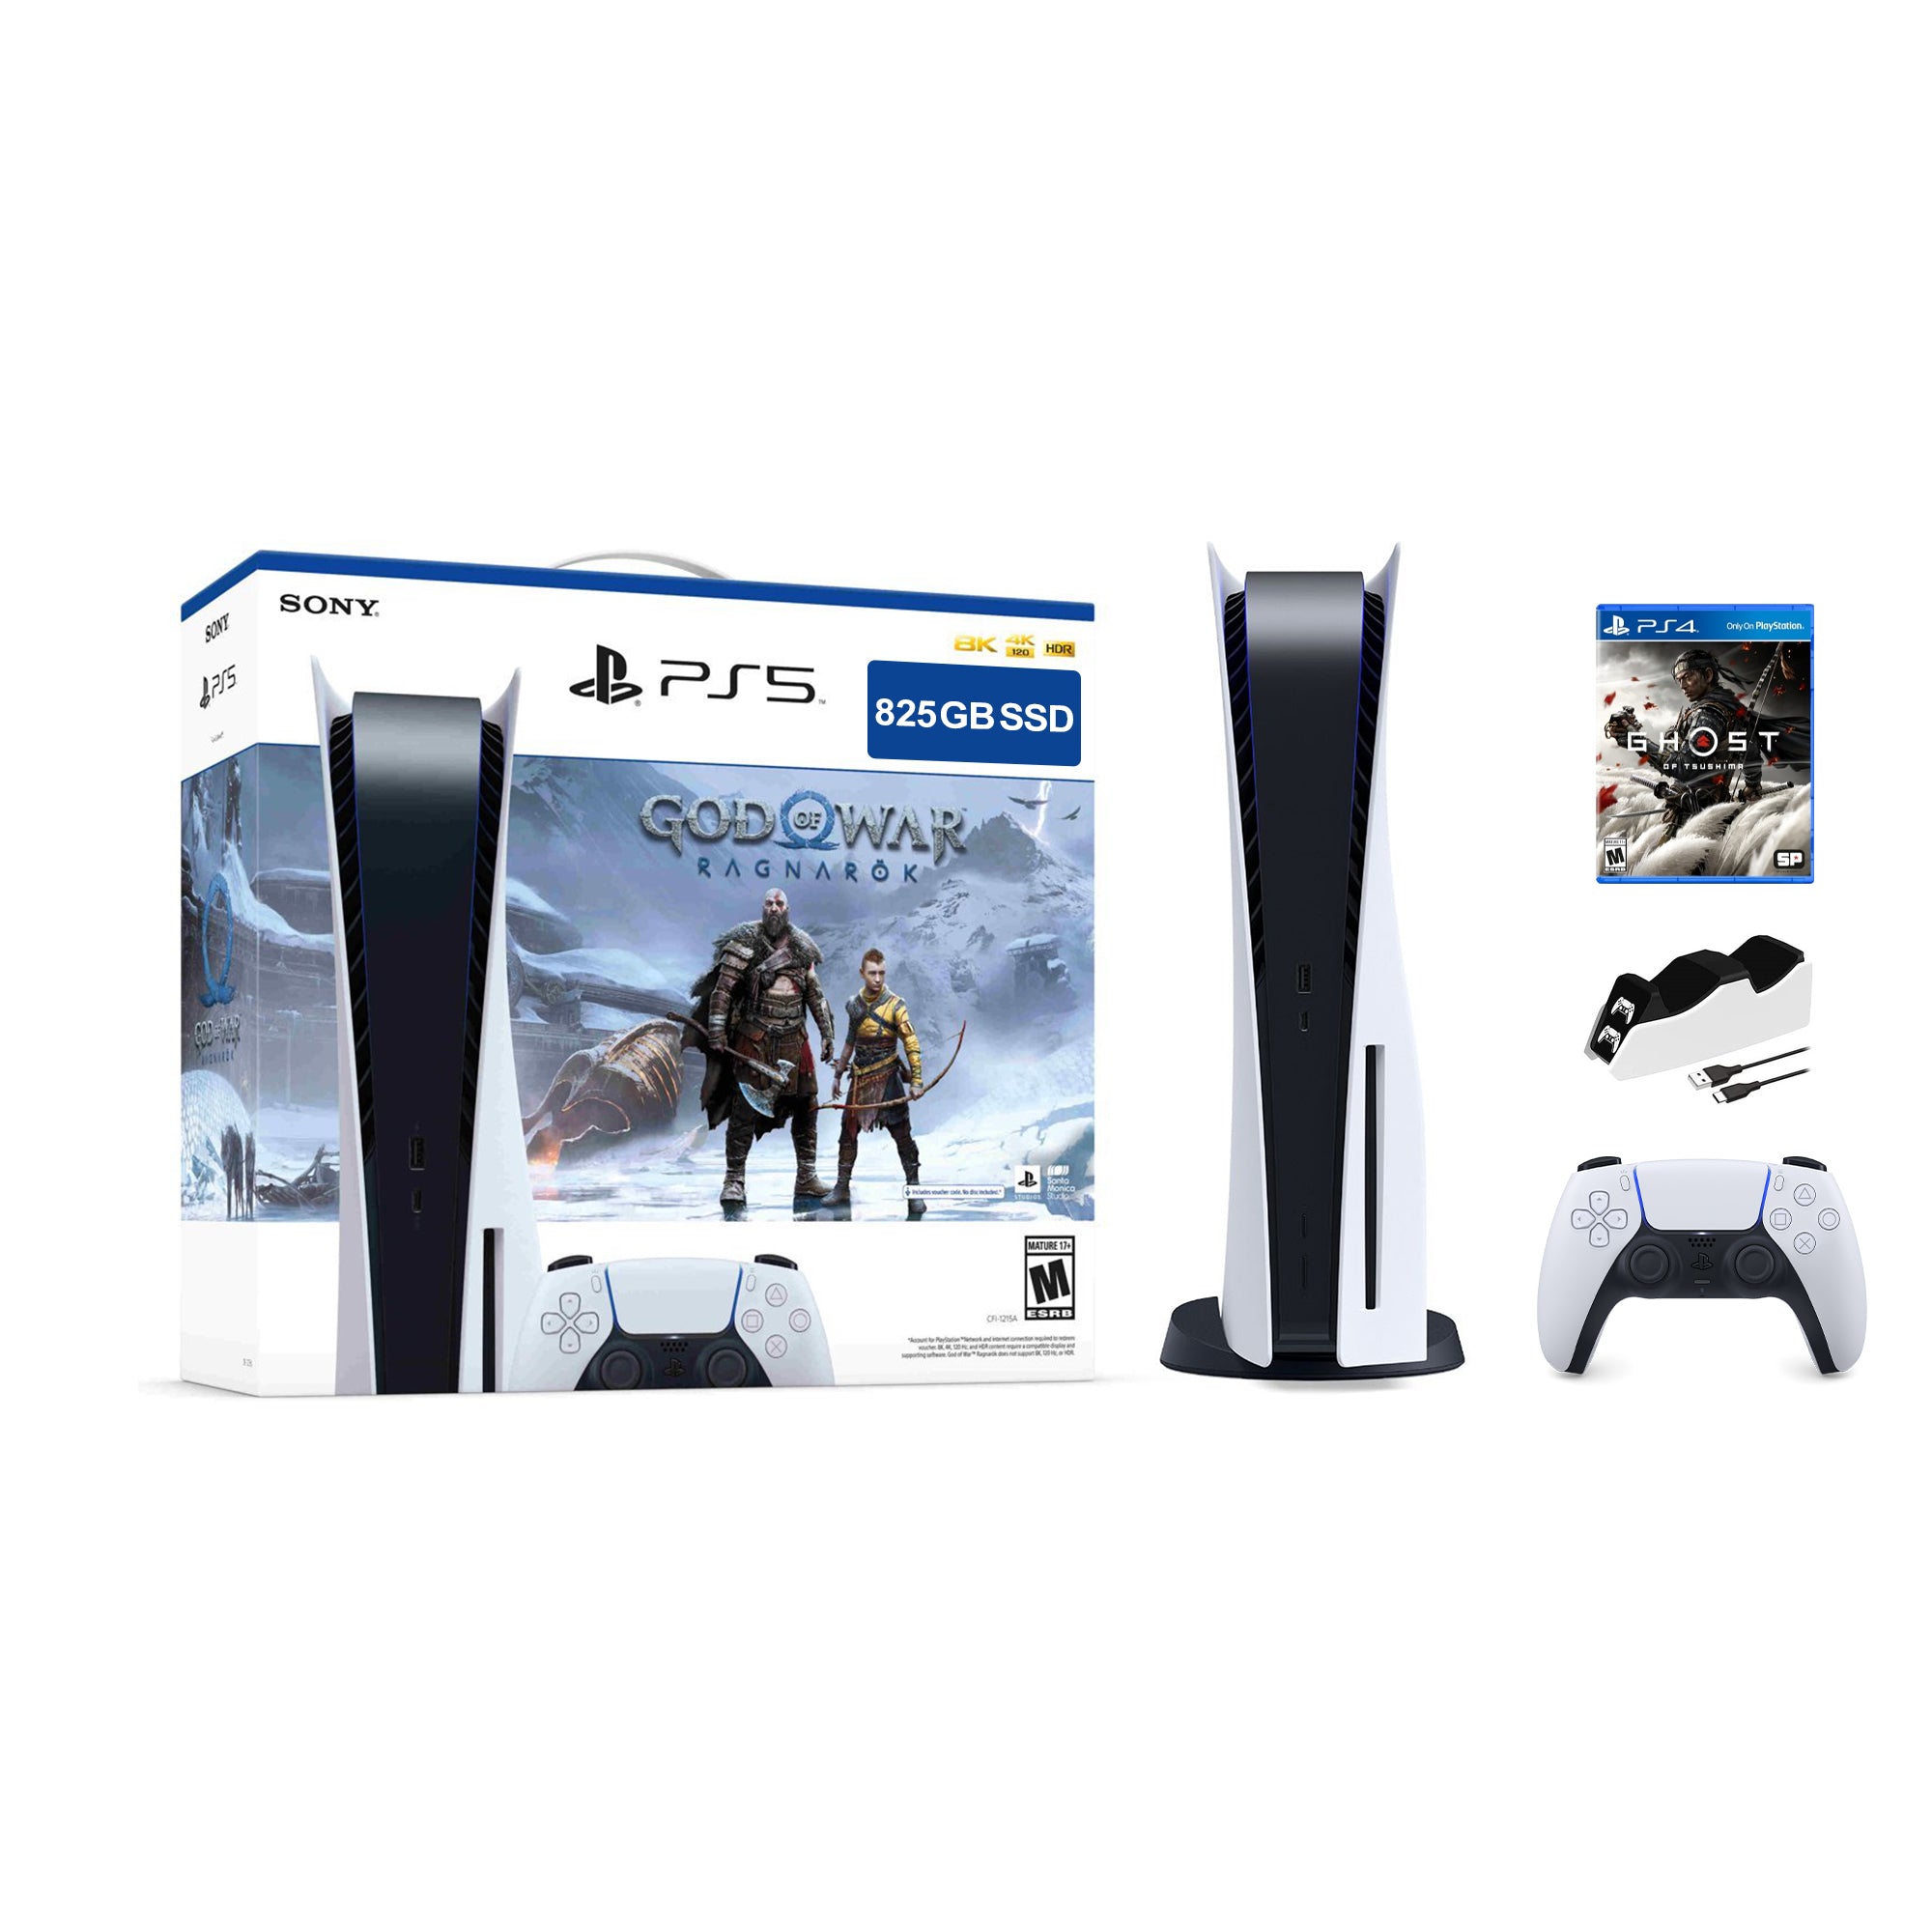 PlayStation 5 Disc Edition God of War Ragnarok Bundle with Ghost of Tsushima and Mytrix Controller Charger